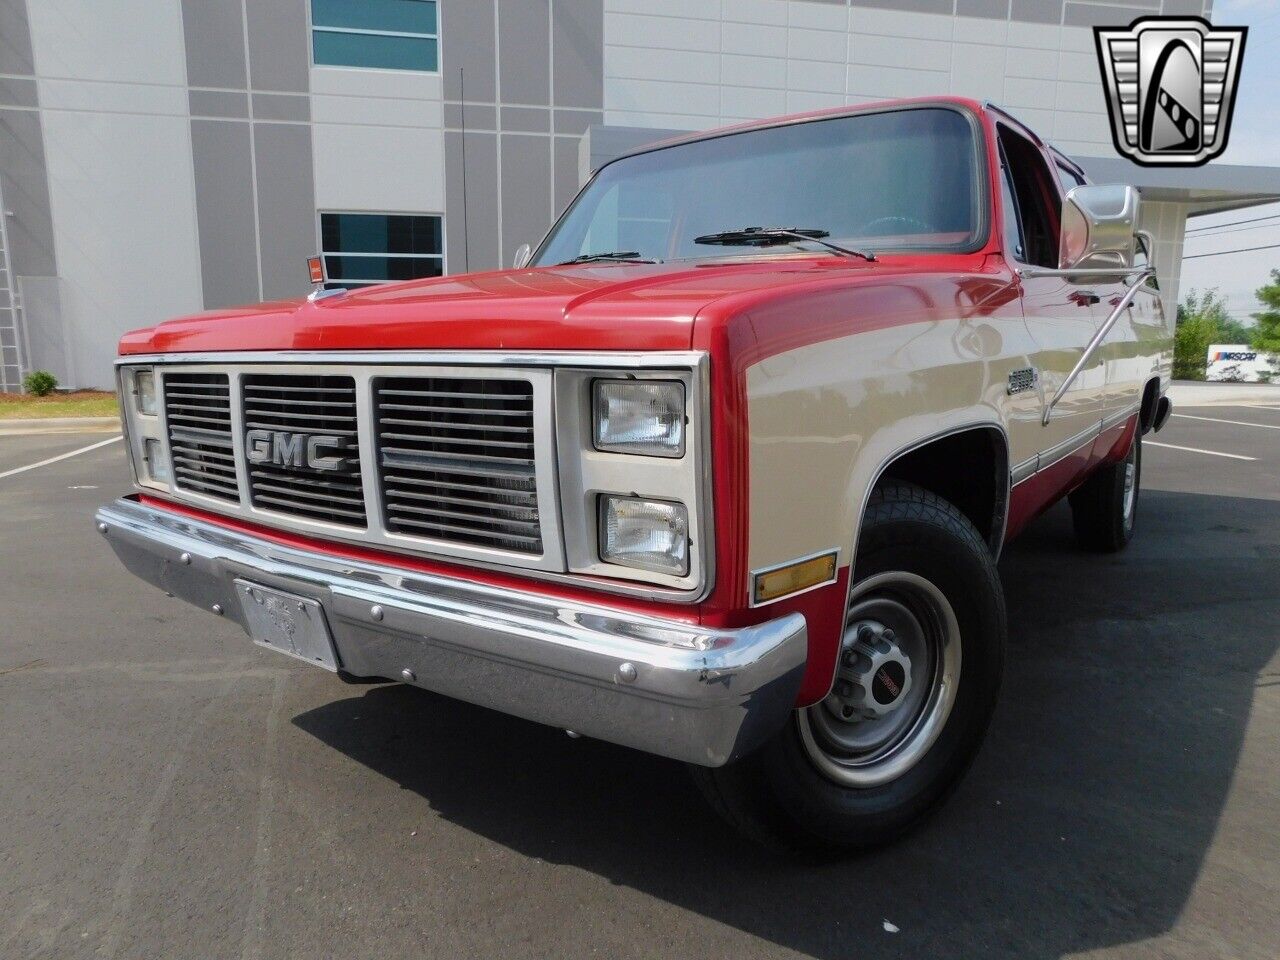 RED 1988 GMC Suburban  Jasper Replacement 2017 V8 Automatic Available Now!